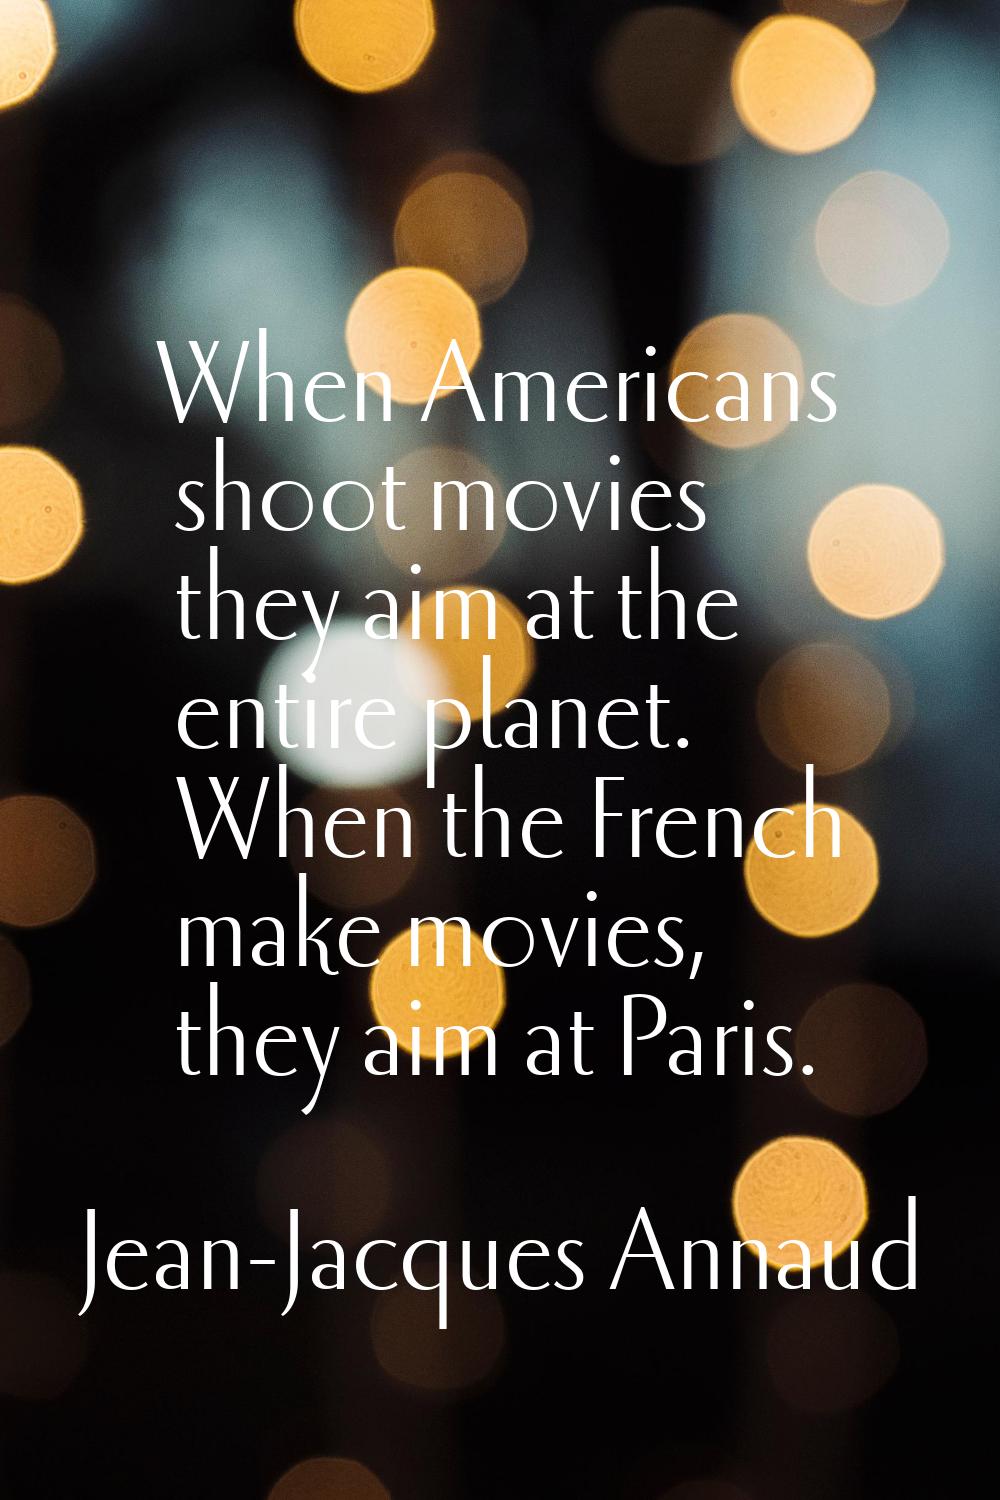 When Americans shoot movies they aim at the entire planet. When the French make movies, they aim at